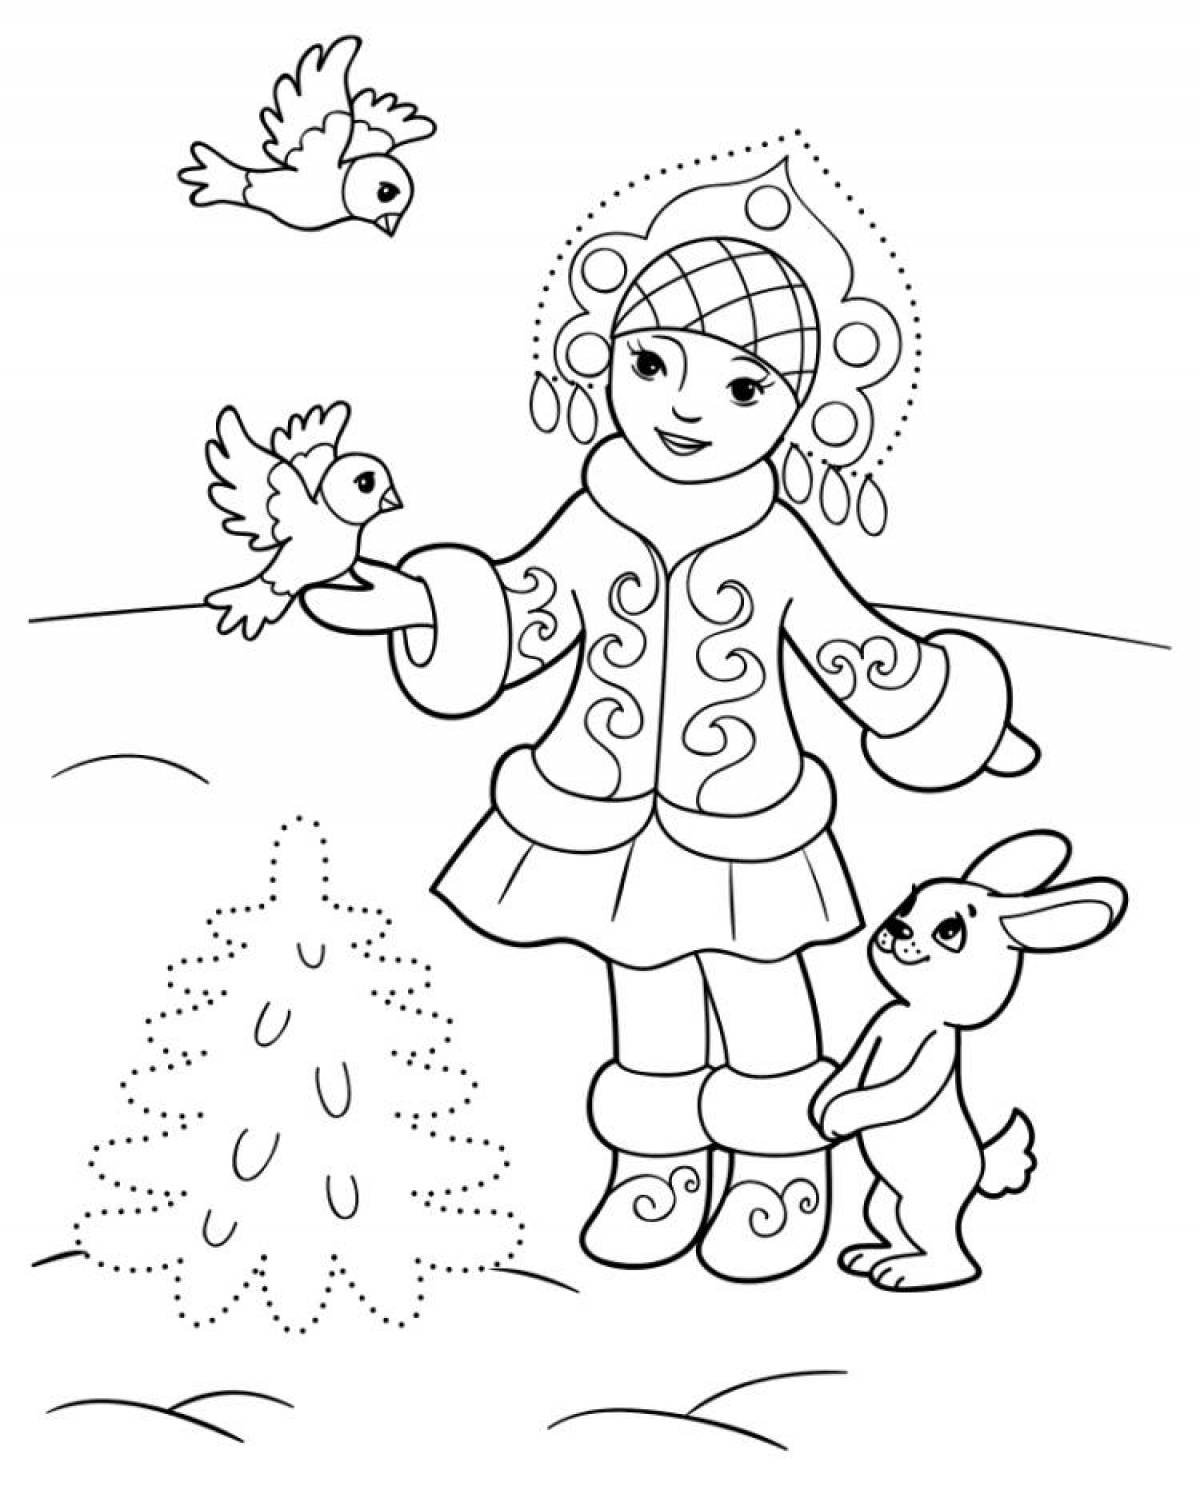 Exquisite snow maiden coloring book for kids